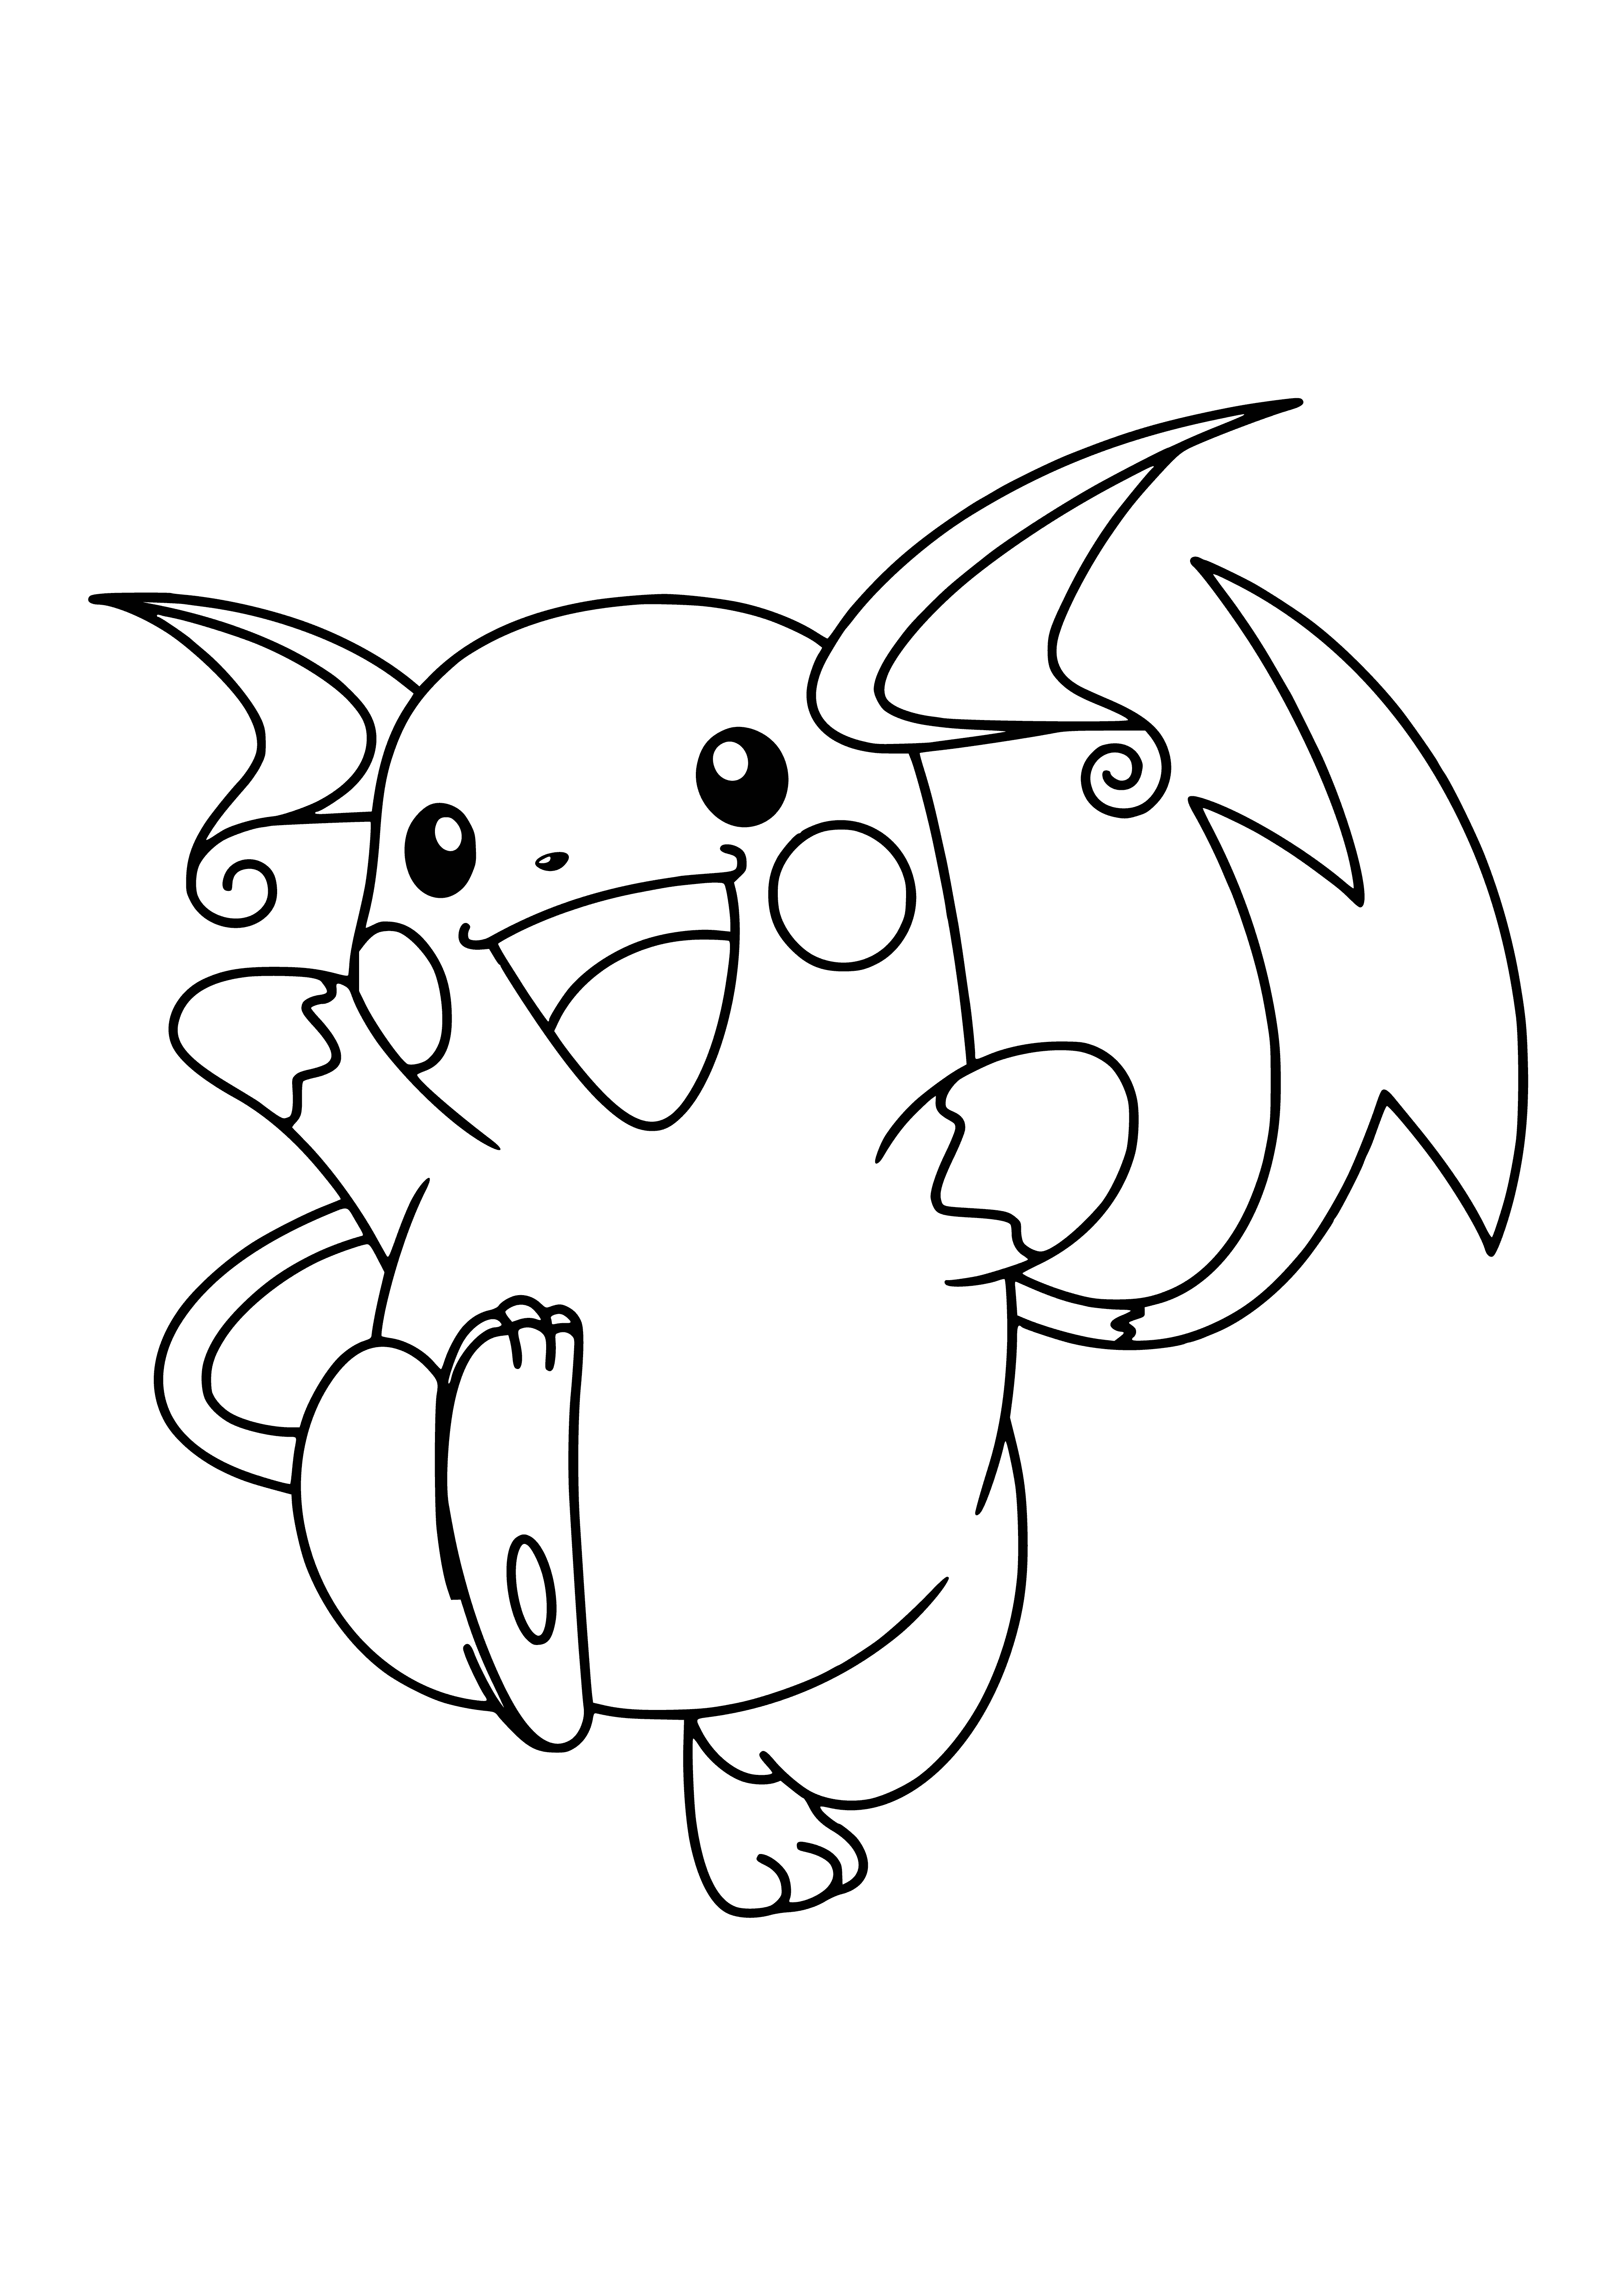 coloring page: Raichu stands on hind legs with long tail, brown body, white belly, pointed ears, large red nose, black eyes, yellow circles, & small triangular teeth.